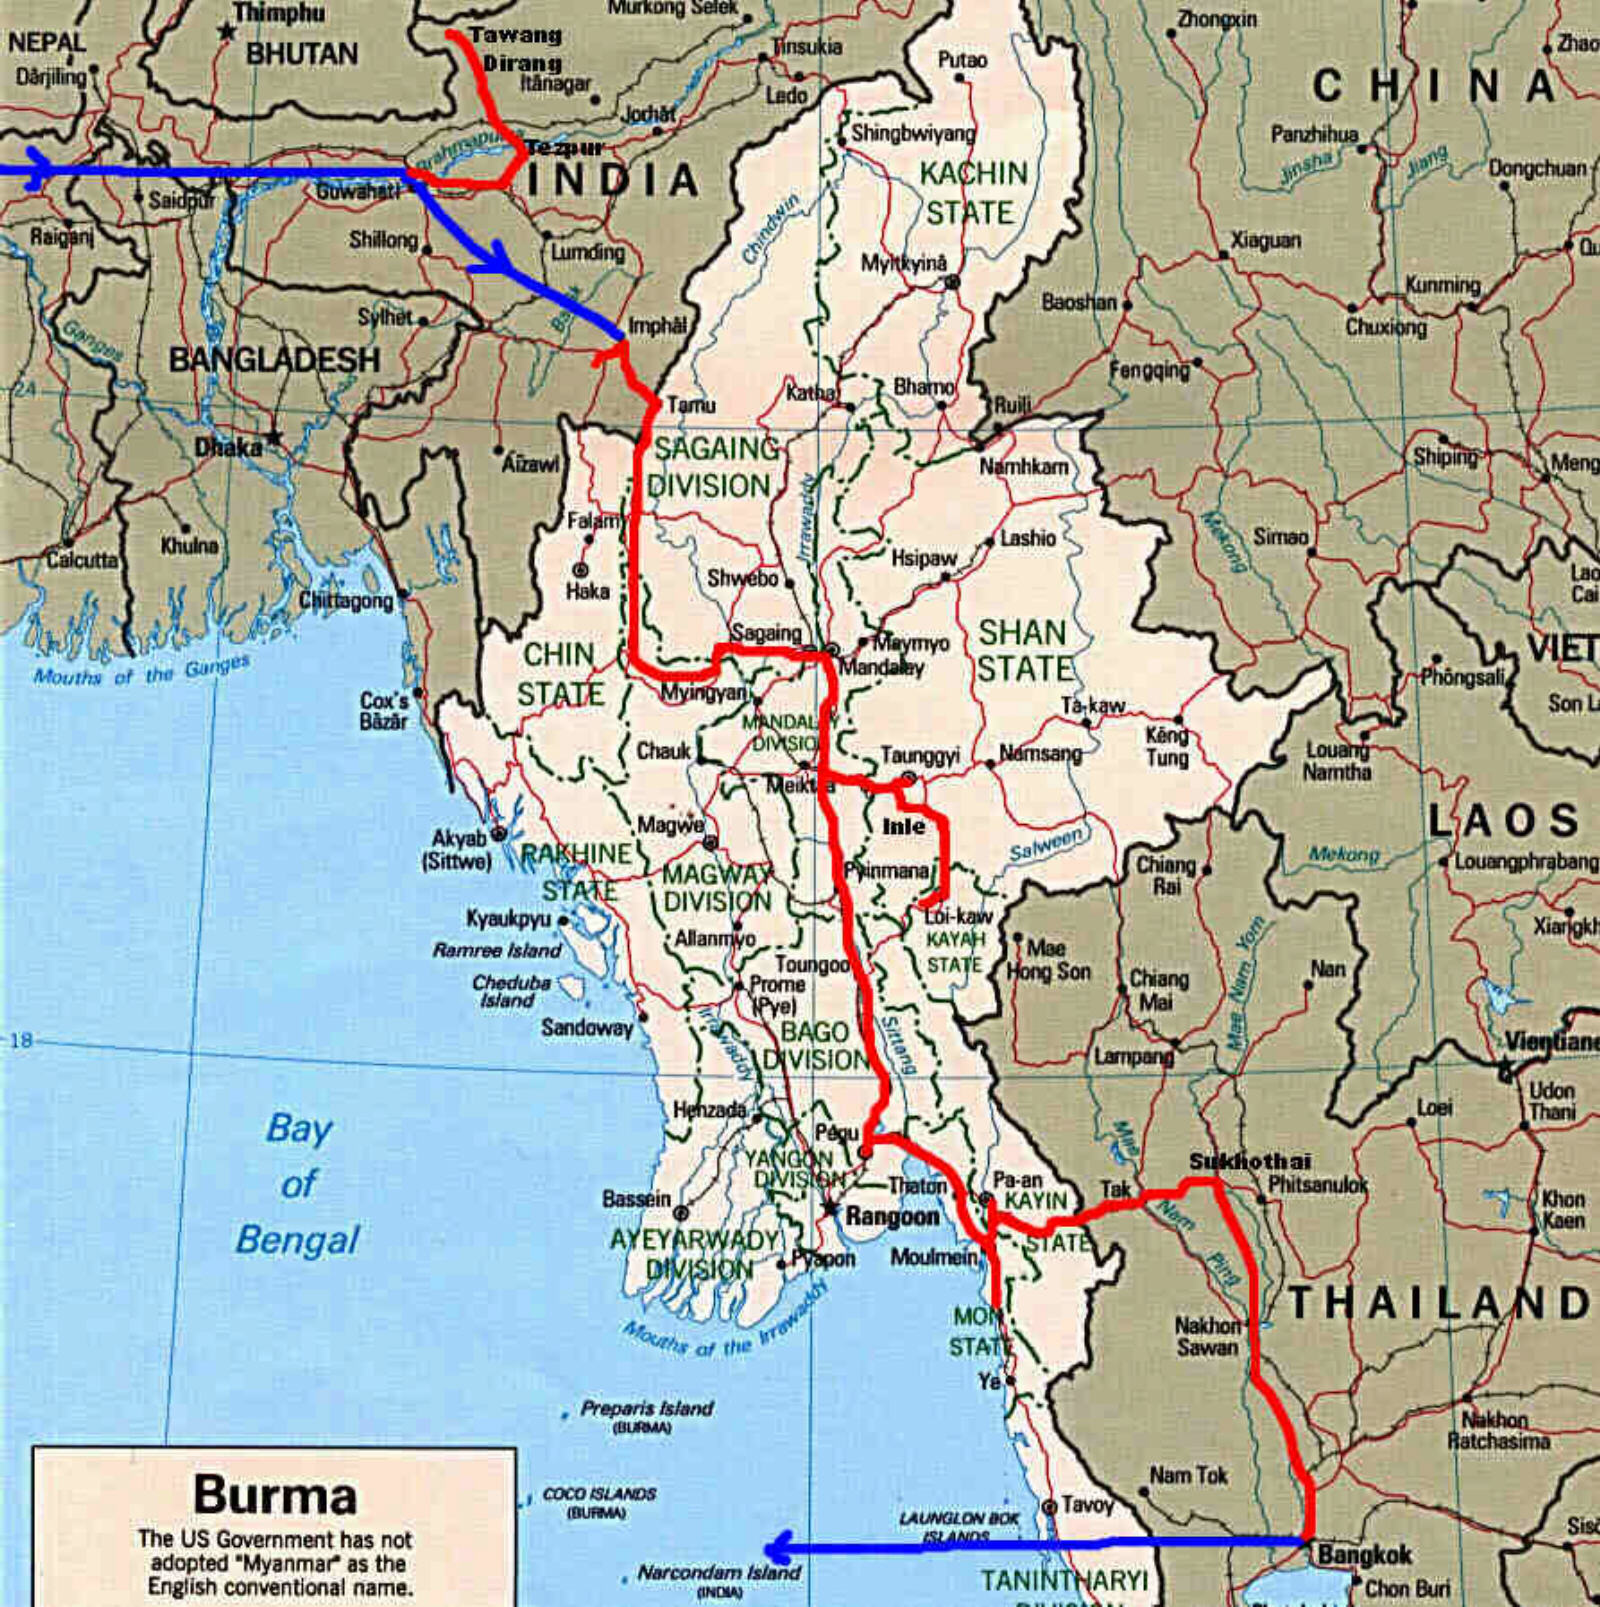 Our route across Burma from India to Thailand